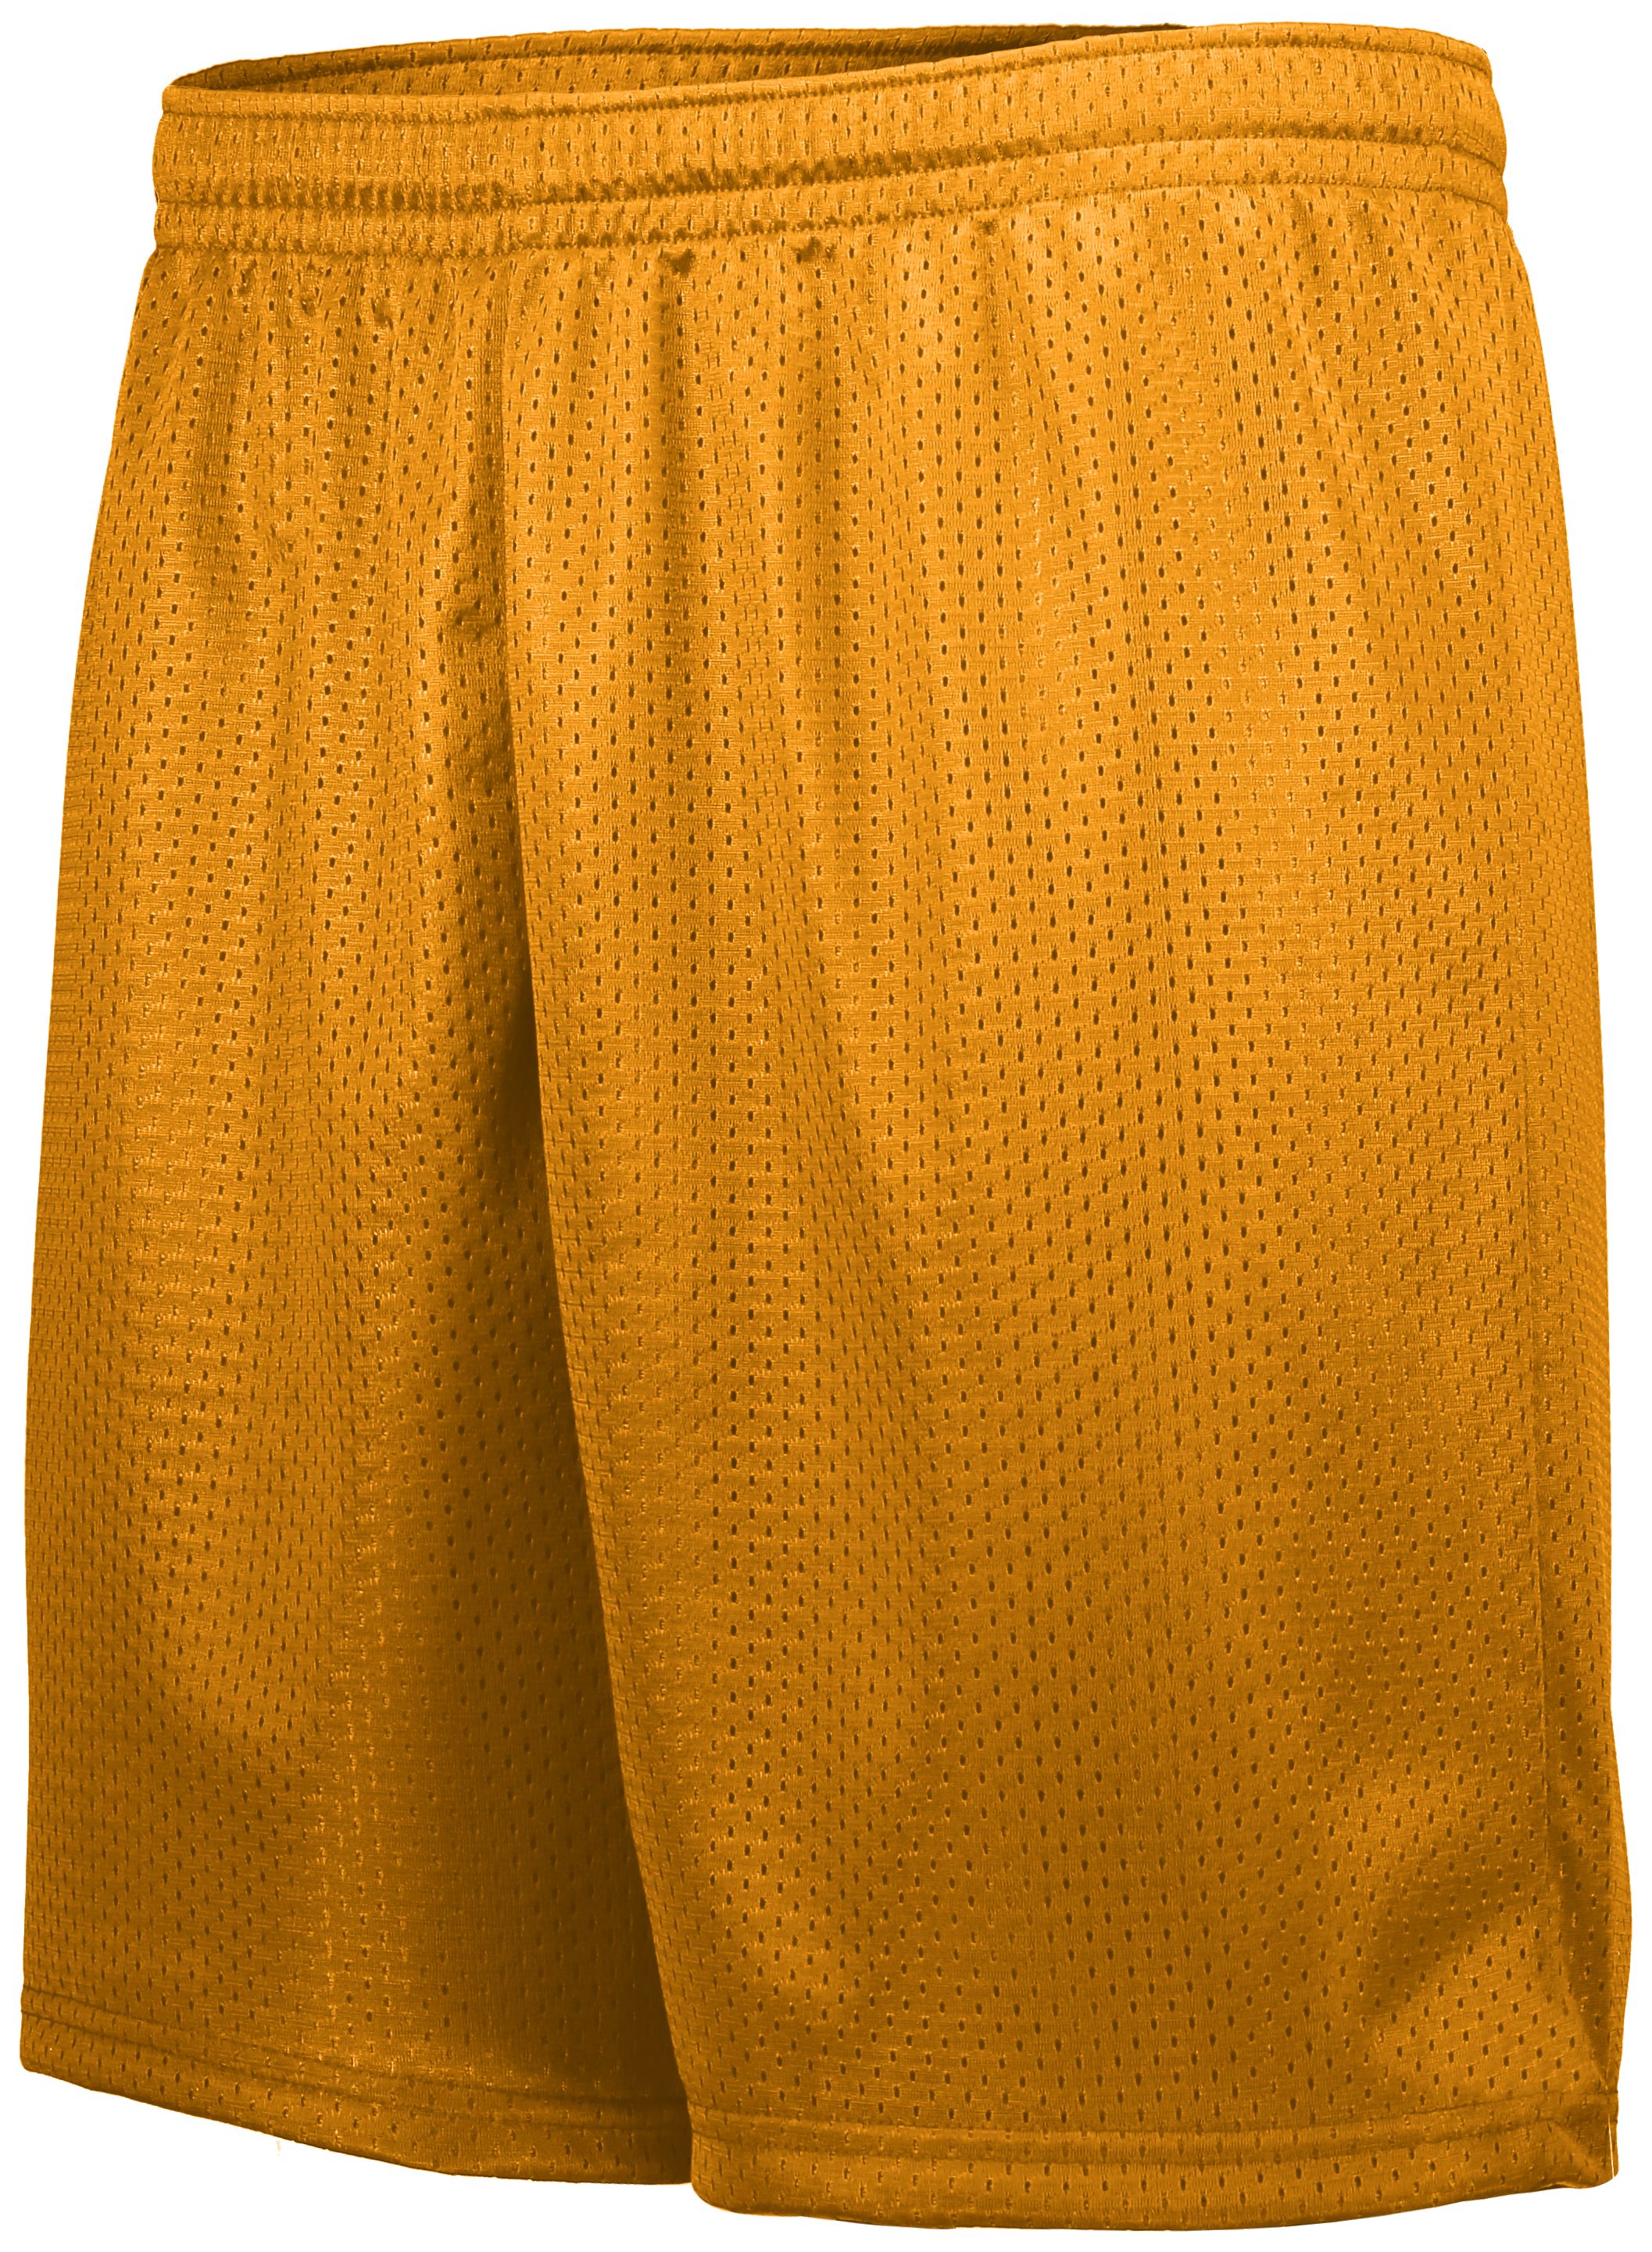 Augusta Sportswear Youth Tricot Mesh Shorts in Gold  -Part of the Youth, Youth-Shorts, Augusta-Products product lines at KanaleyCreations.com